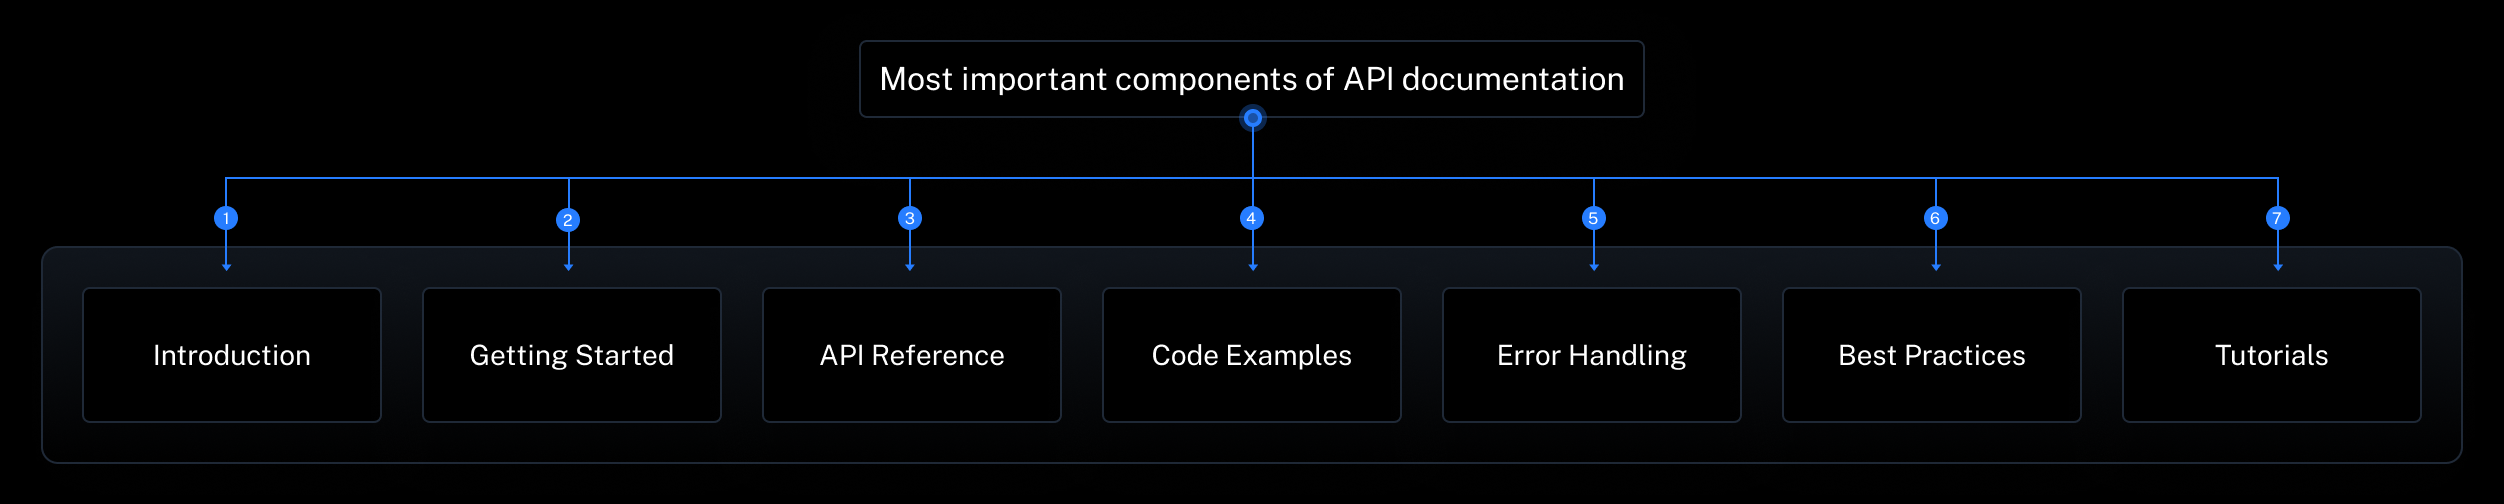 Most important components of API documentation